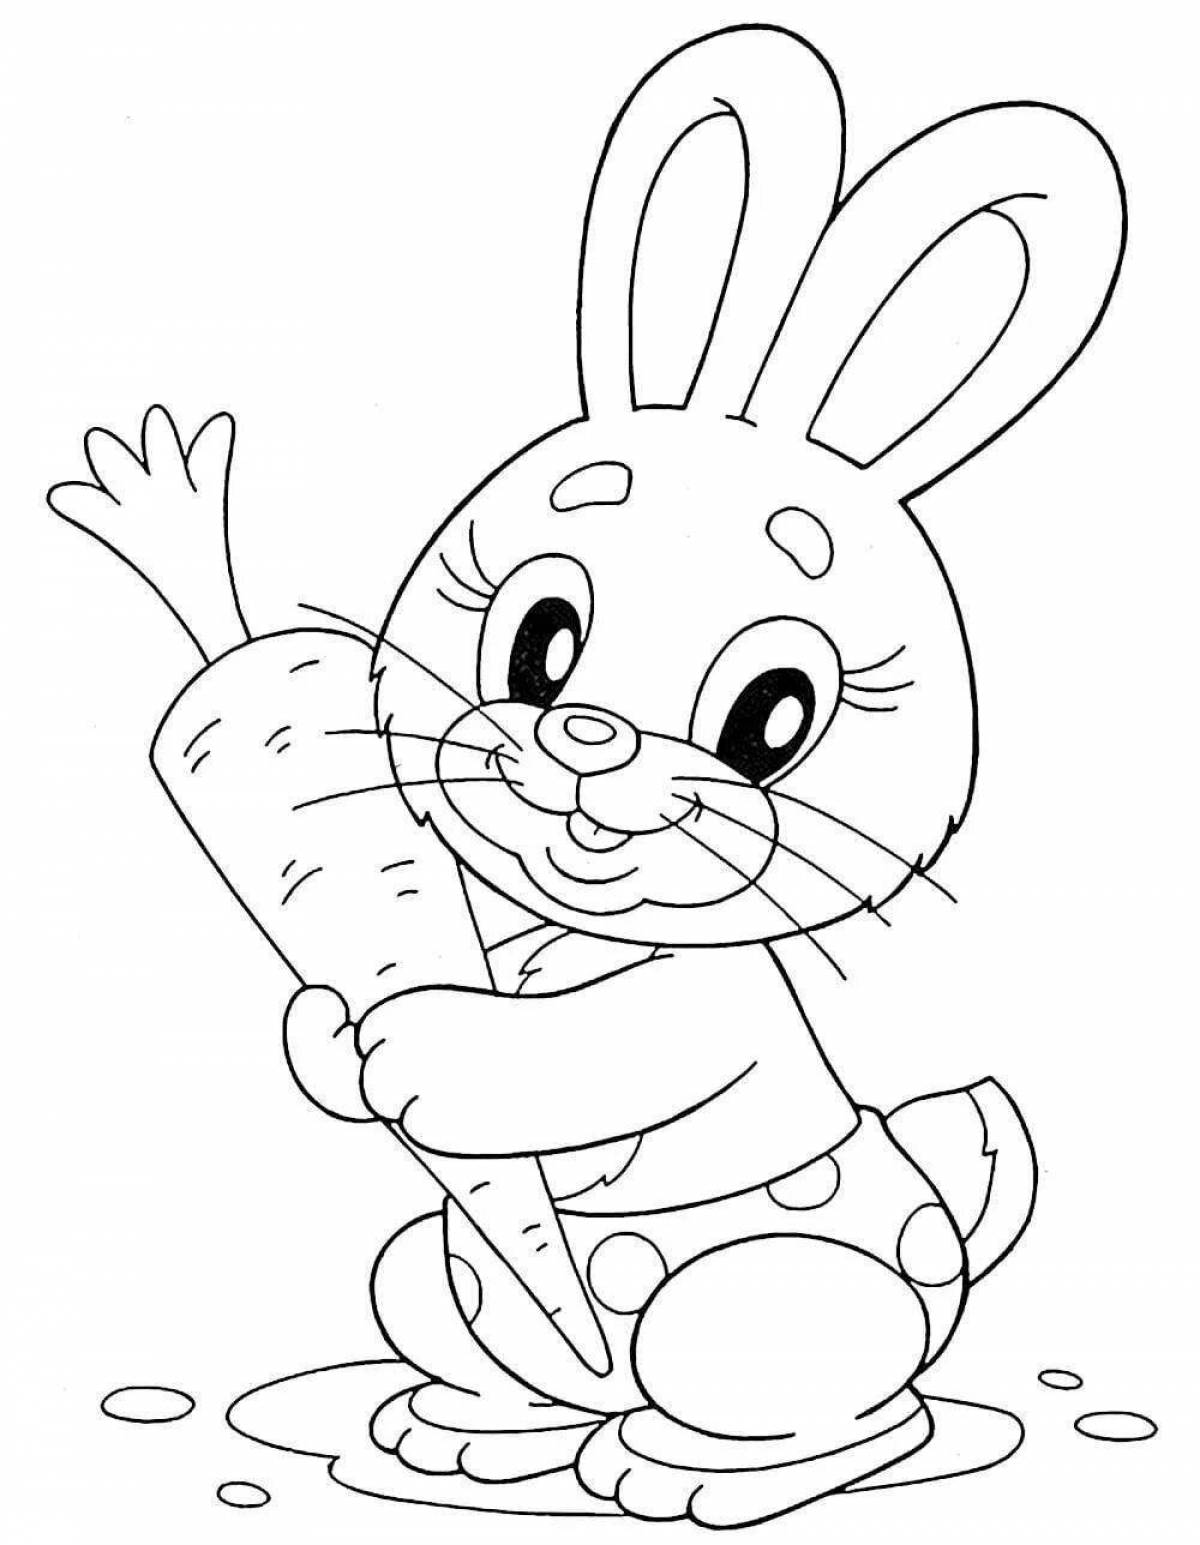 Fun coloring rabbit with a carrot for children